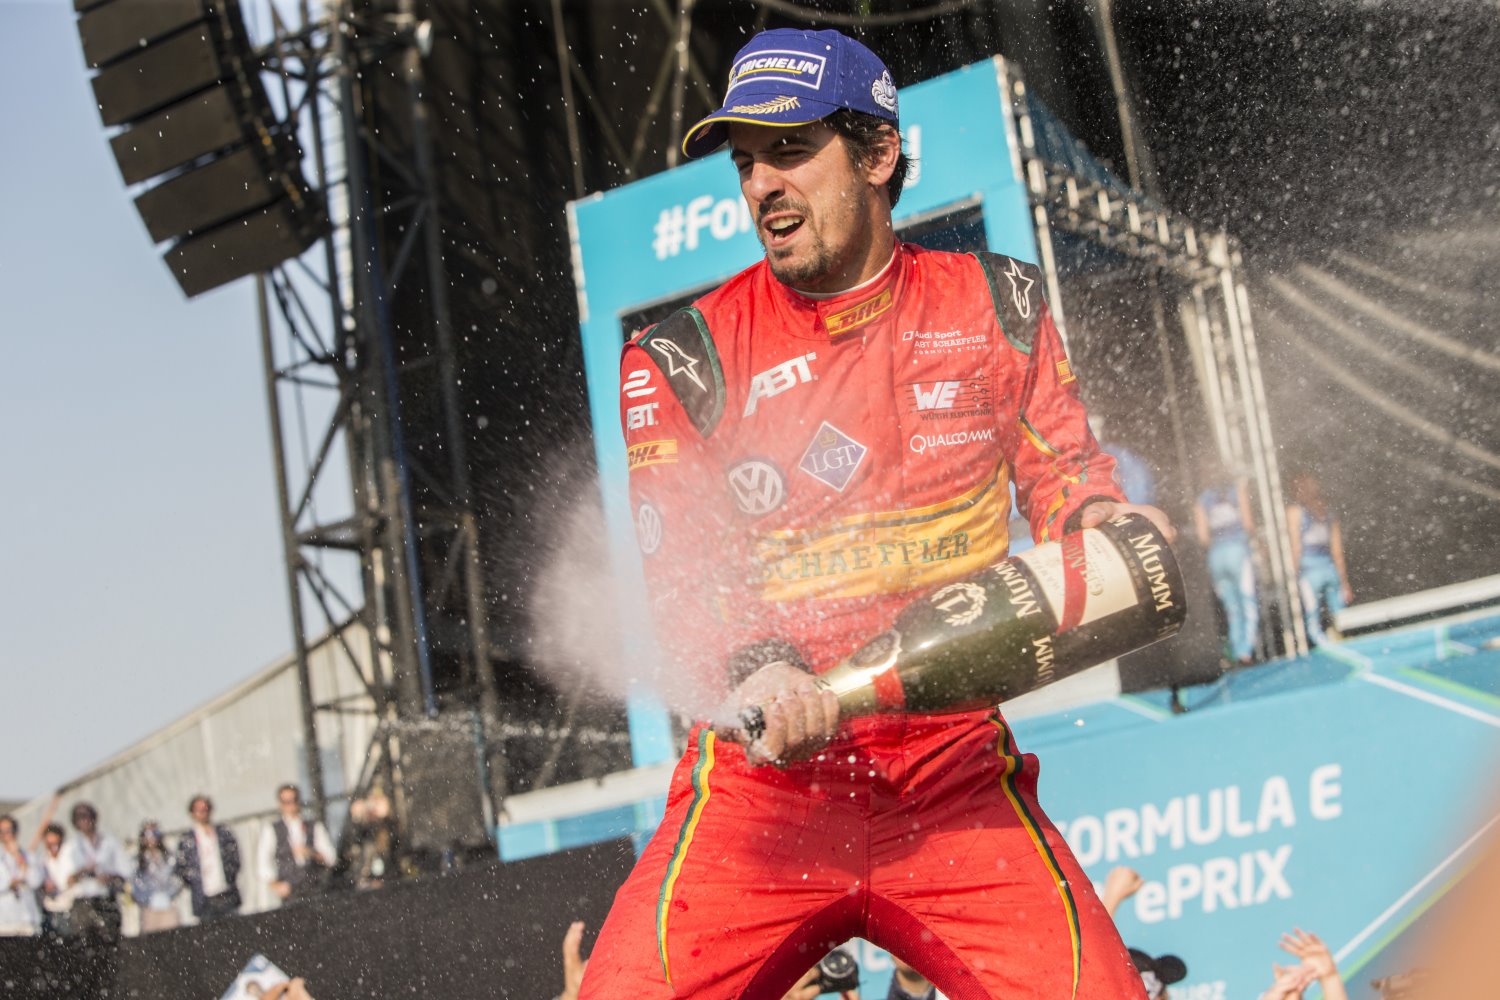 DiGrassi celebrates before being stripped of his win